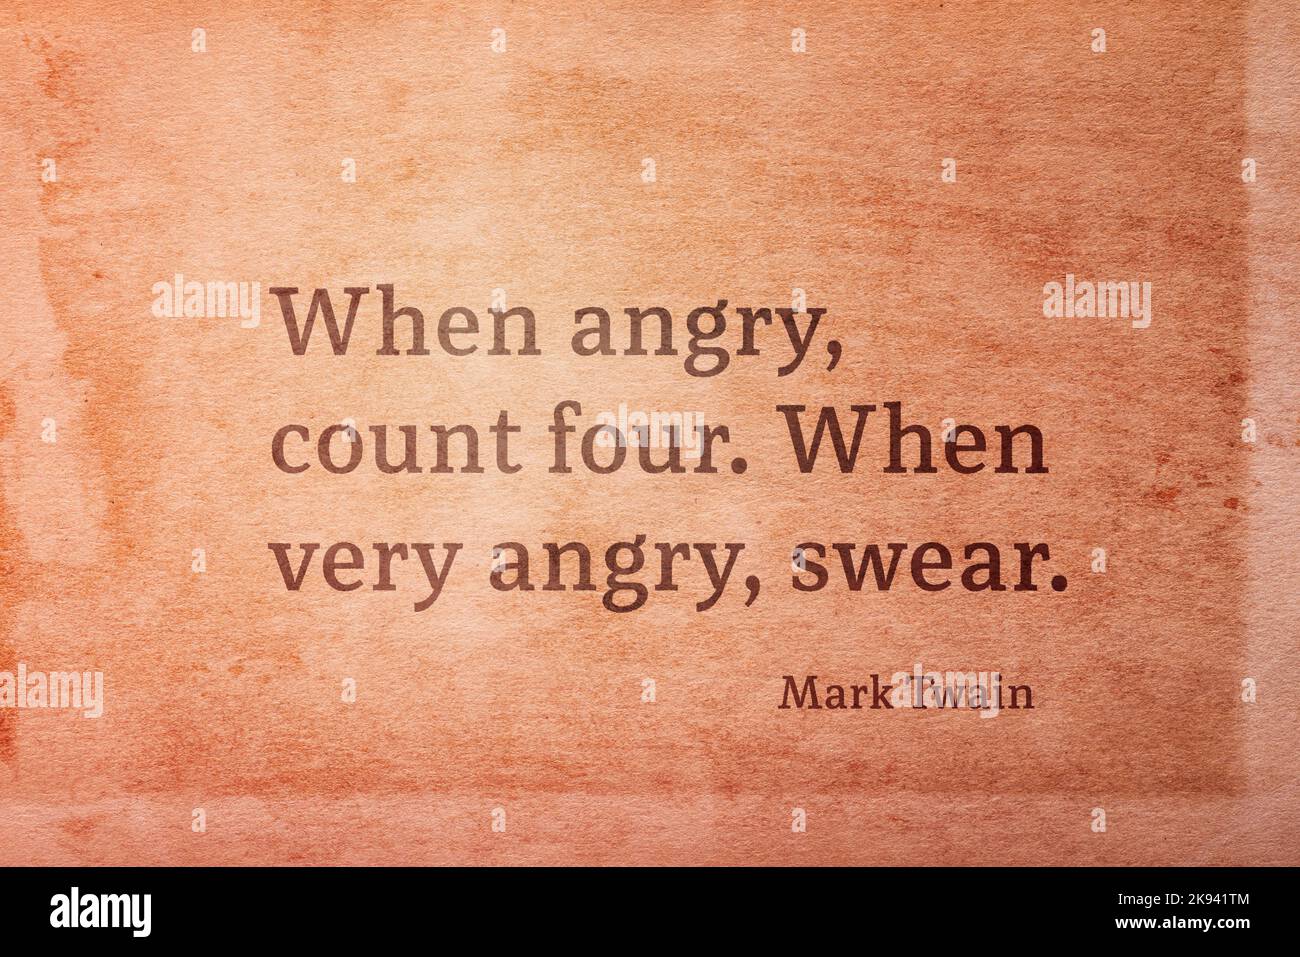 When angry, count four. When very angry, swear - famous American writer Mark Twain quote printed on vintage grunge paper Stock Photo